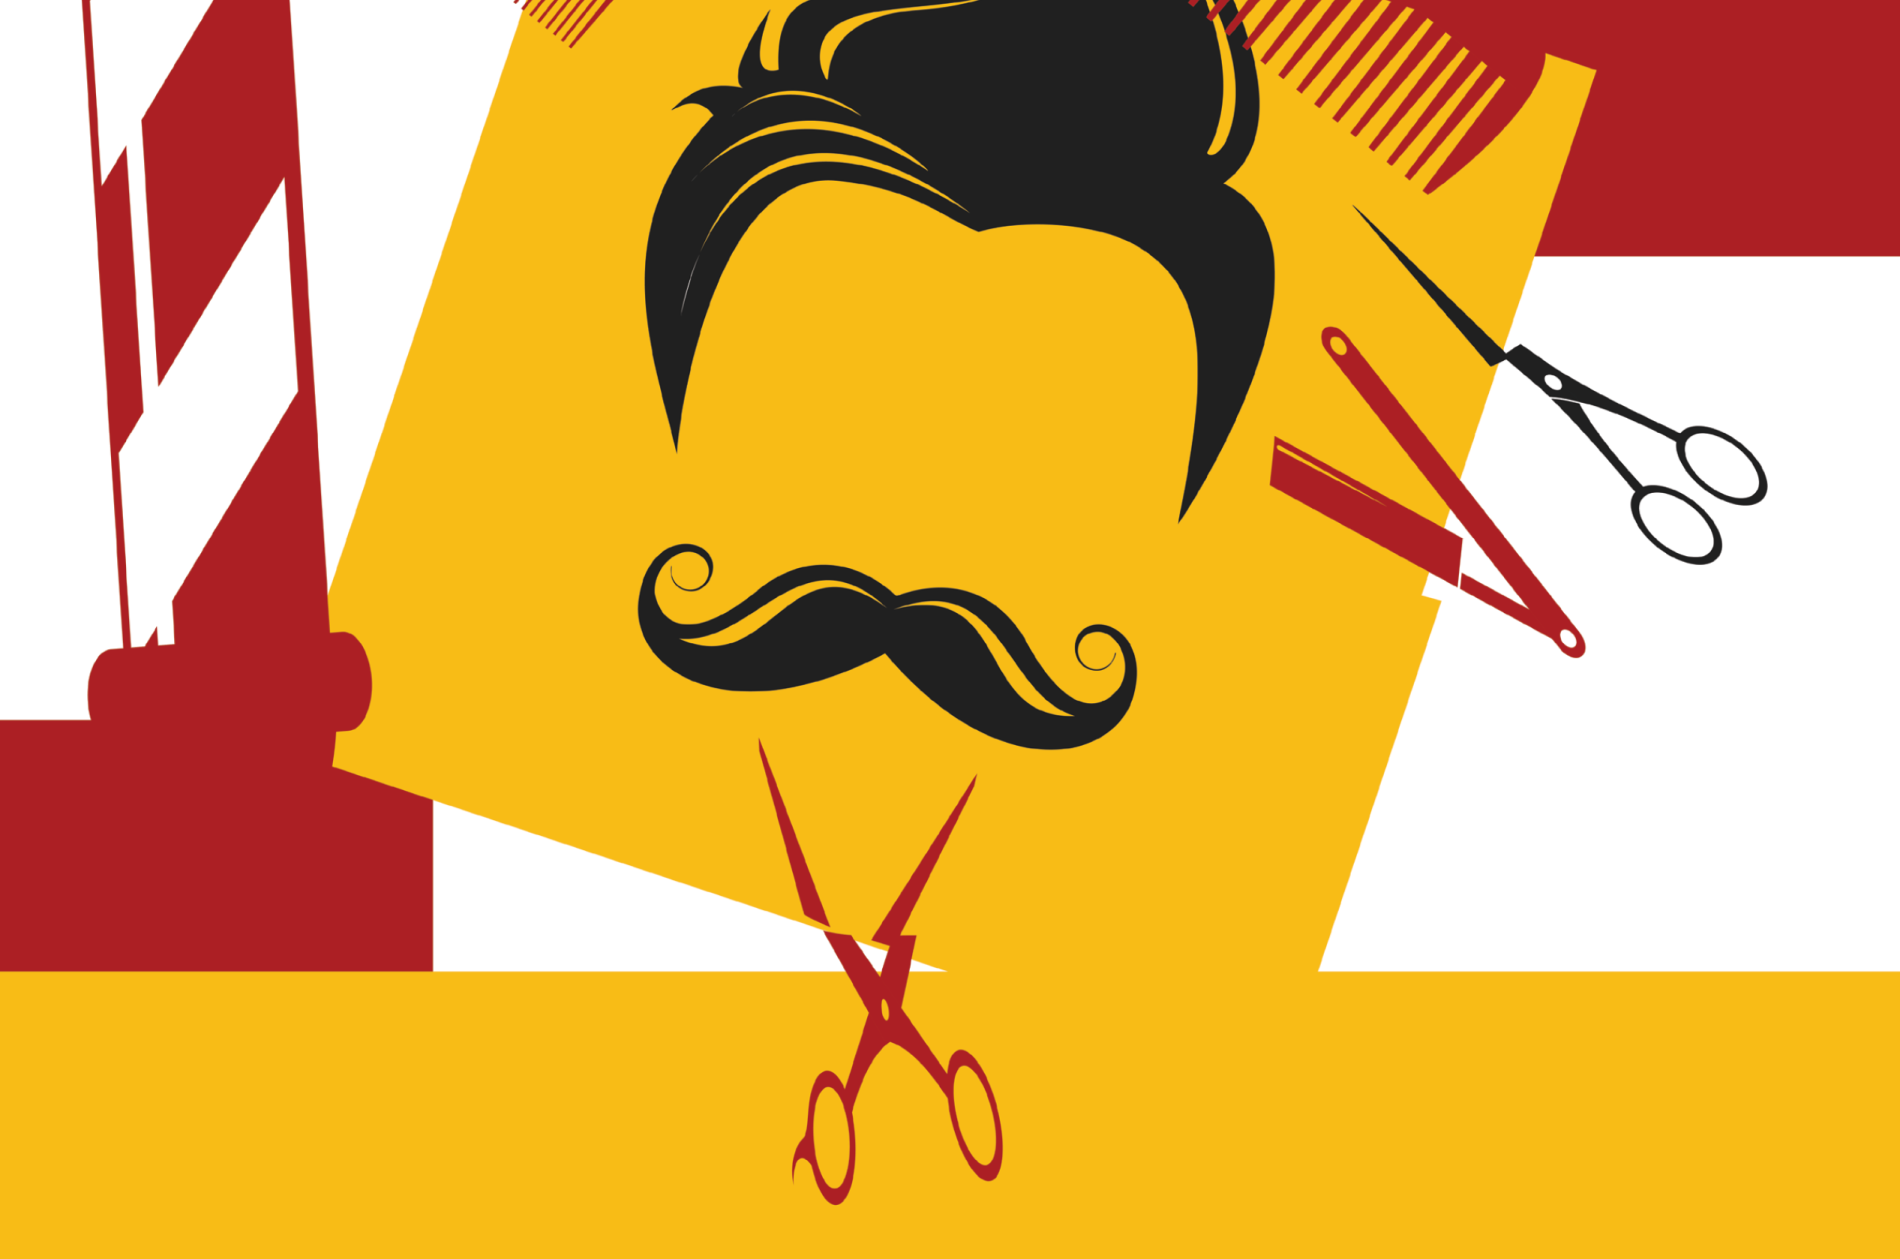 Red, gold, and white graphic with barber pole, hair piece, mustache, combs and clippers